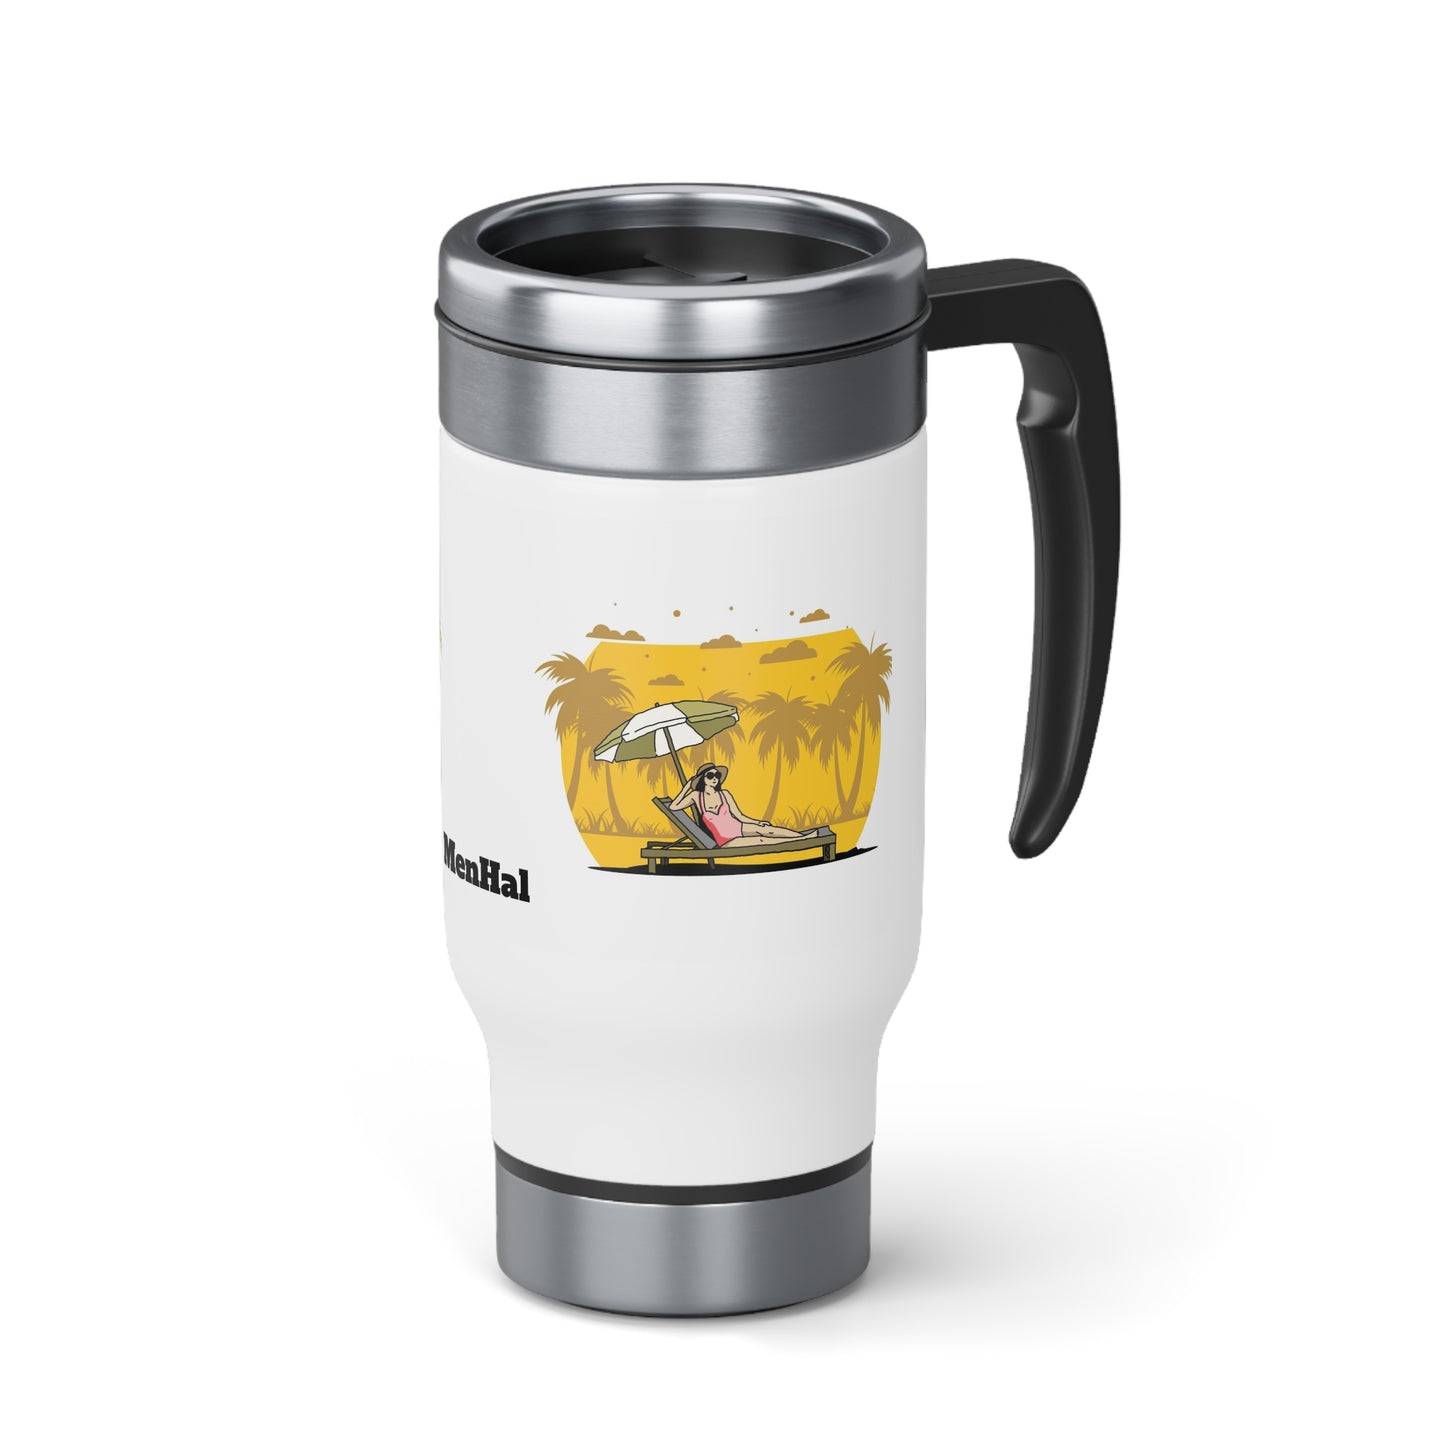 Chill on beach - Stainless Steel Travel Mug with Handle, 14oz